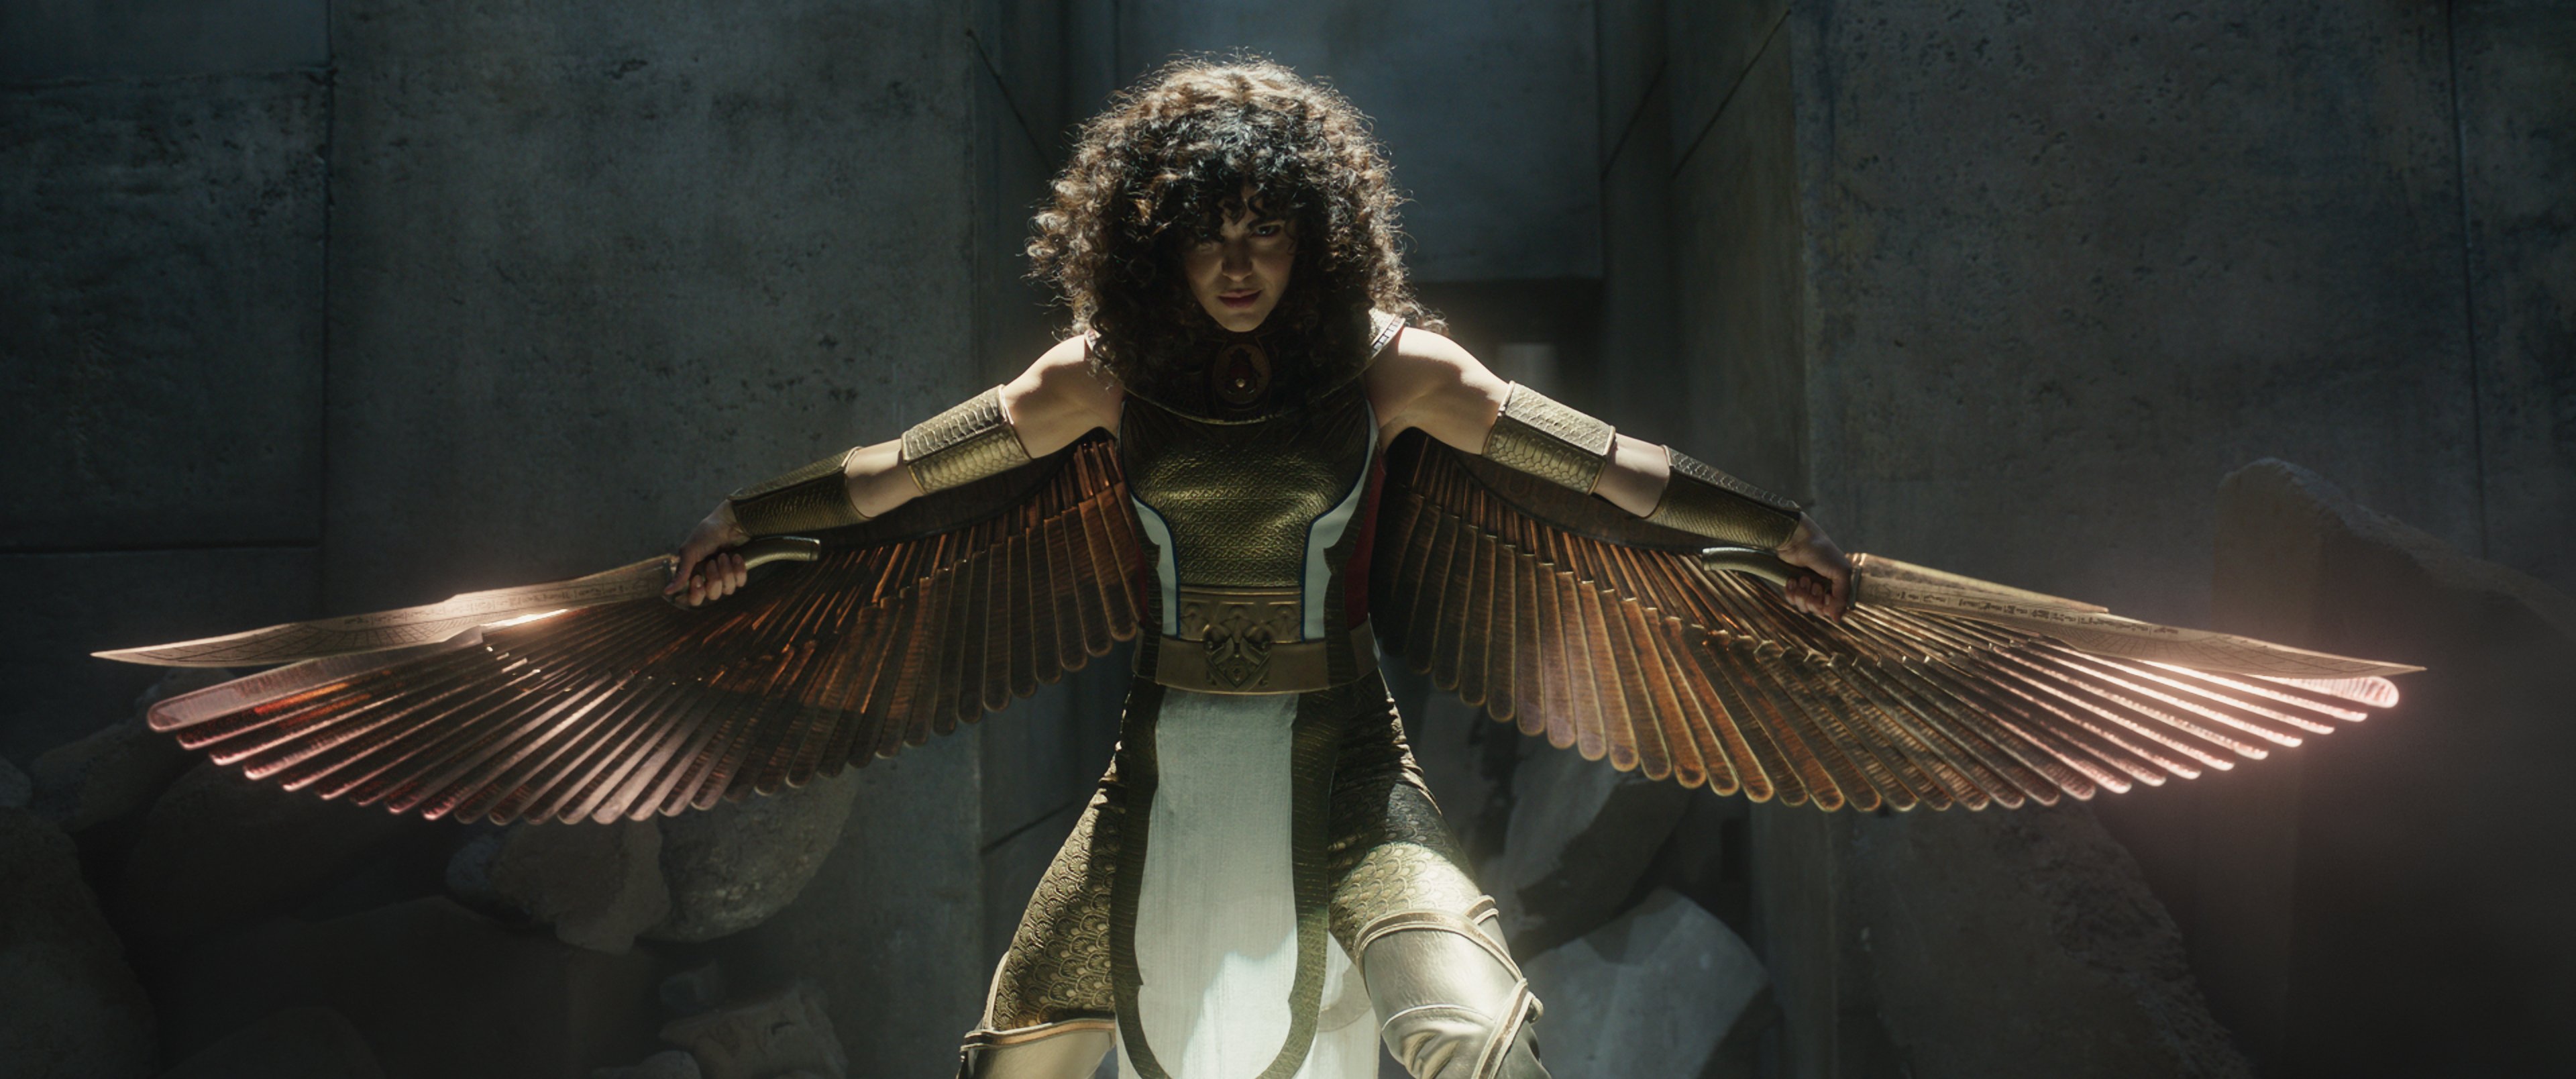 A woman in a superhero suit with metallic wings.